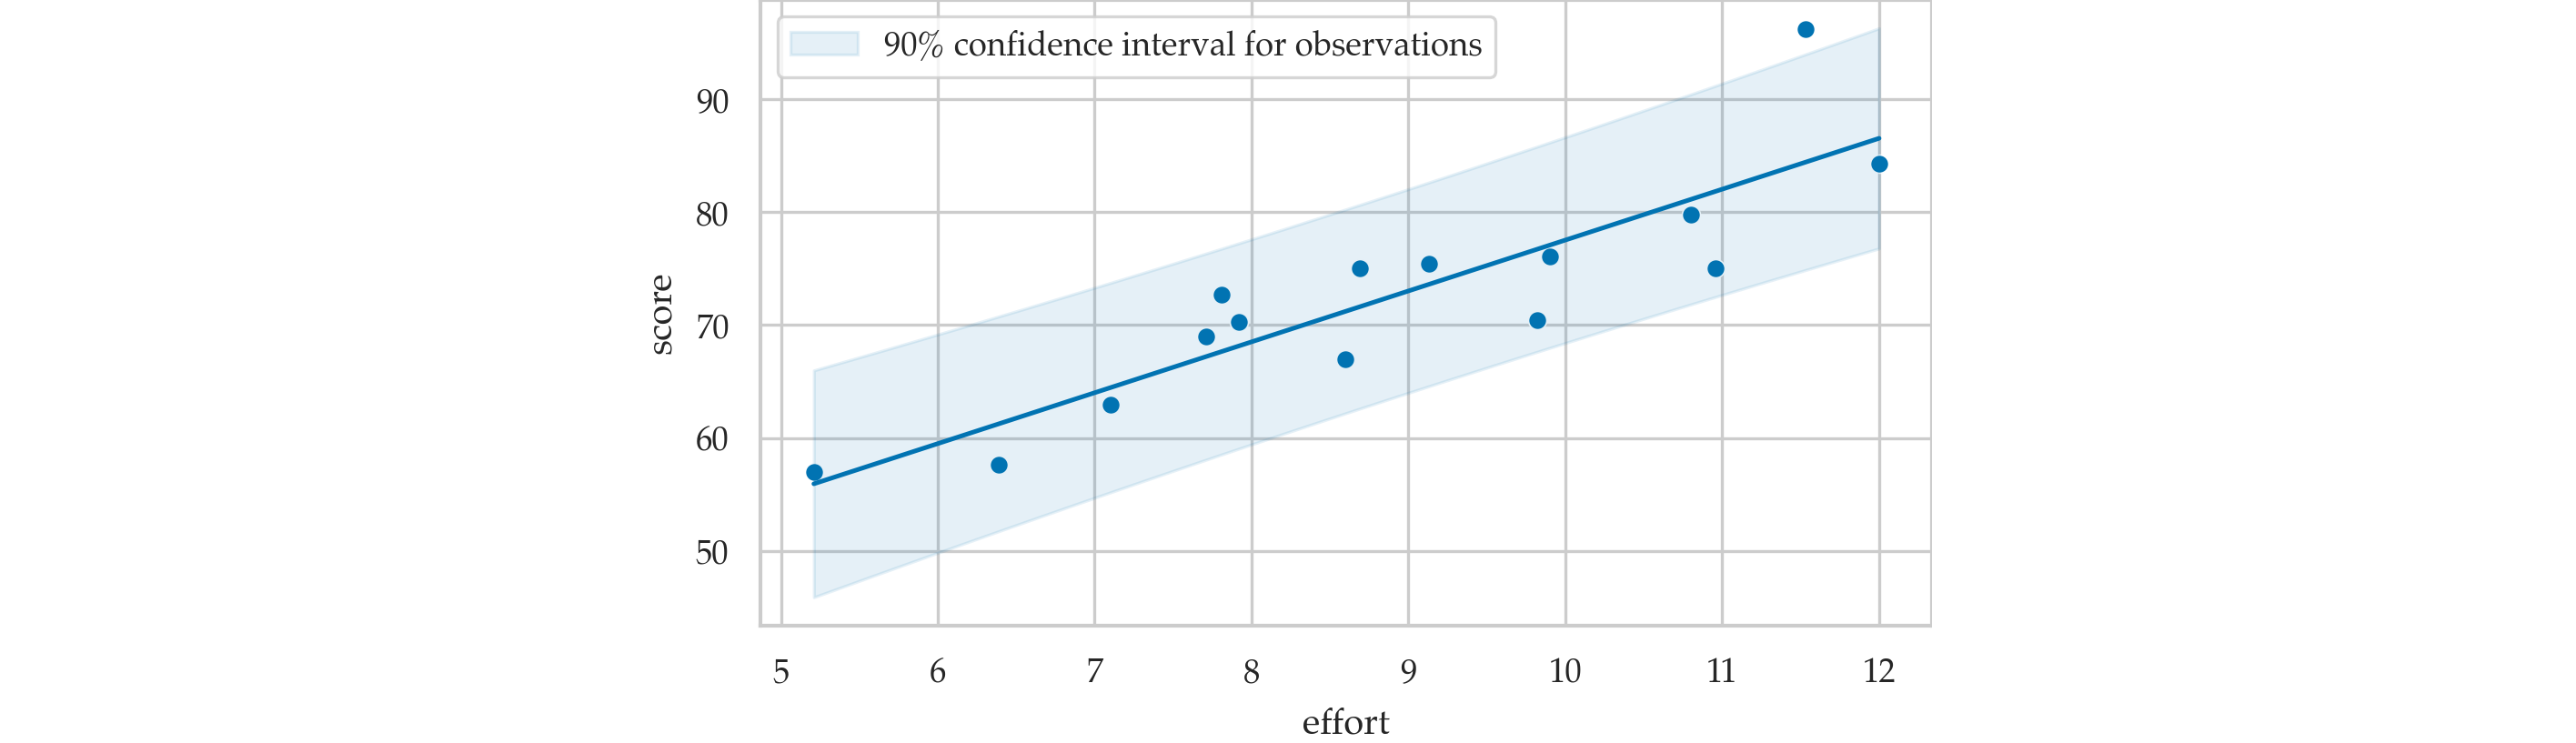 Plot of the 90% confidence interval for the outcomes.